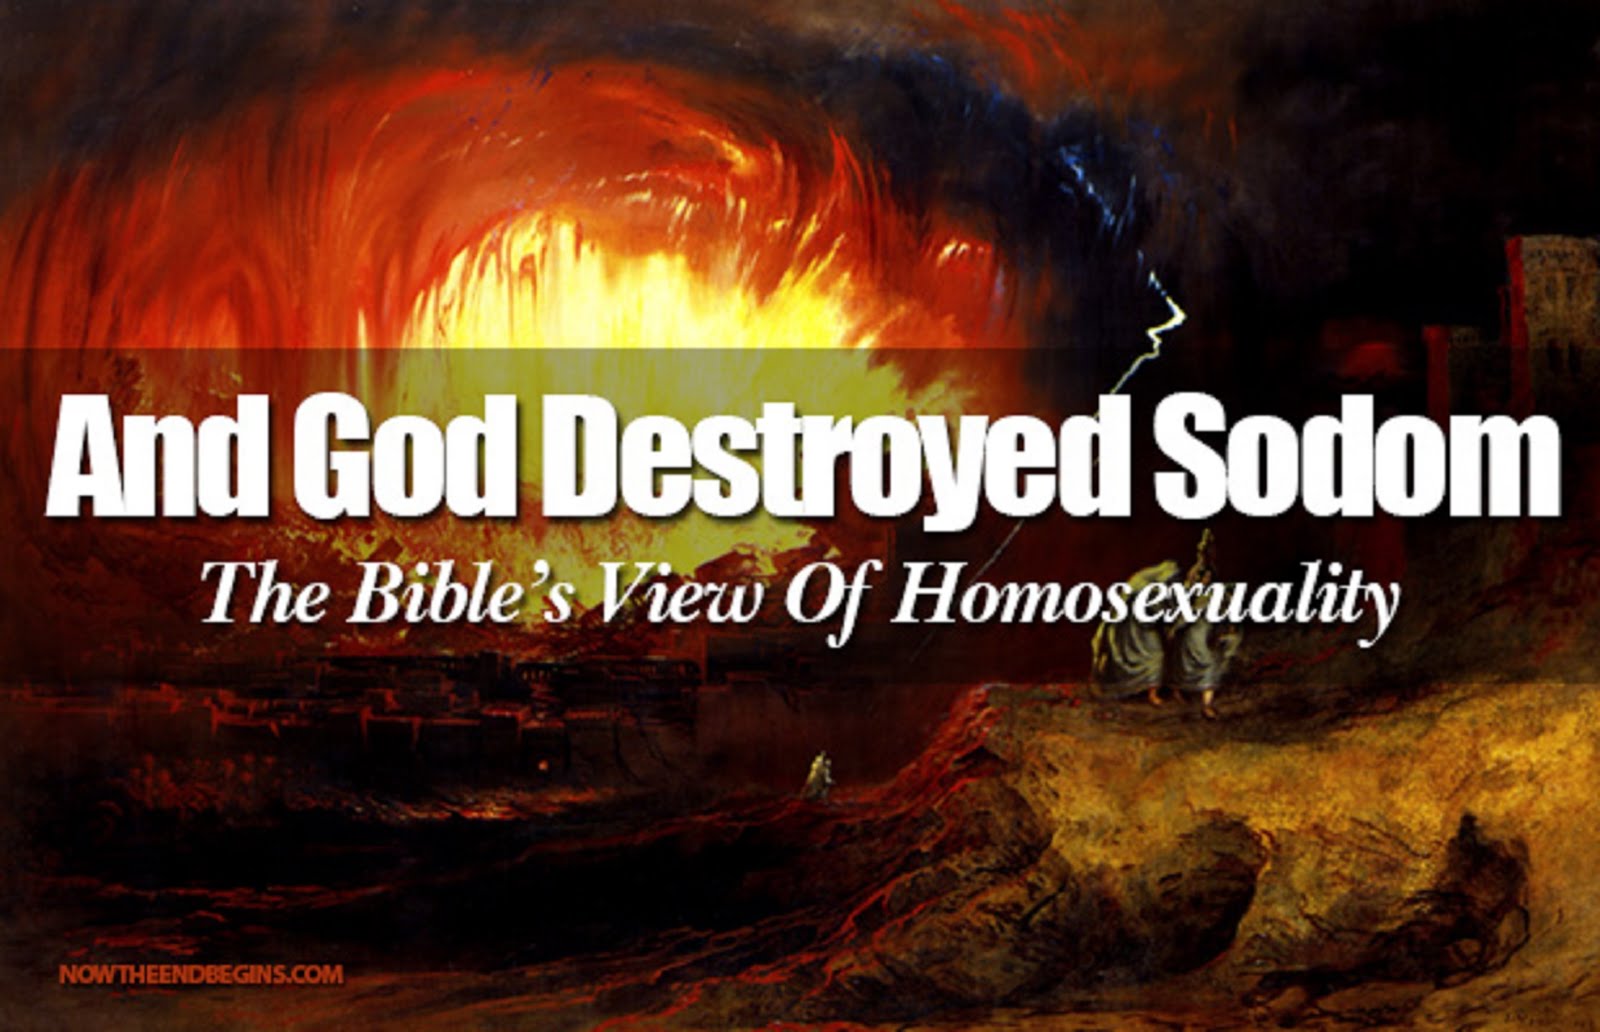 AND GOD DESTROYED SODOM